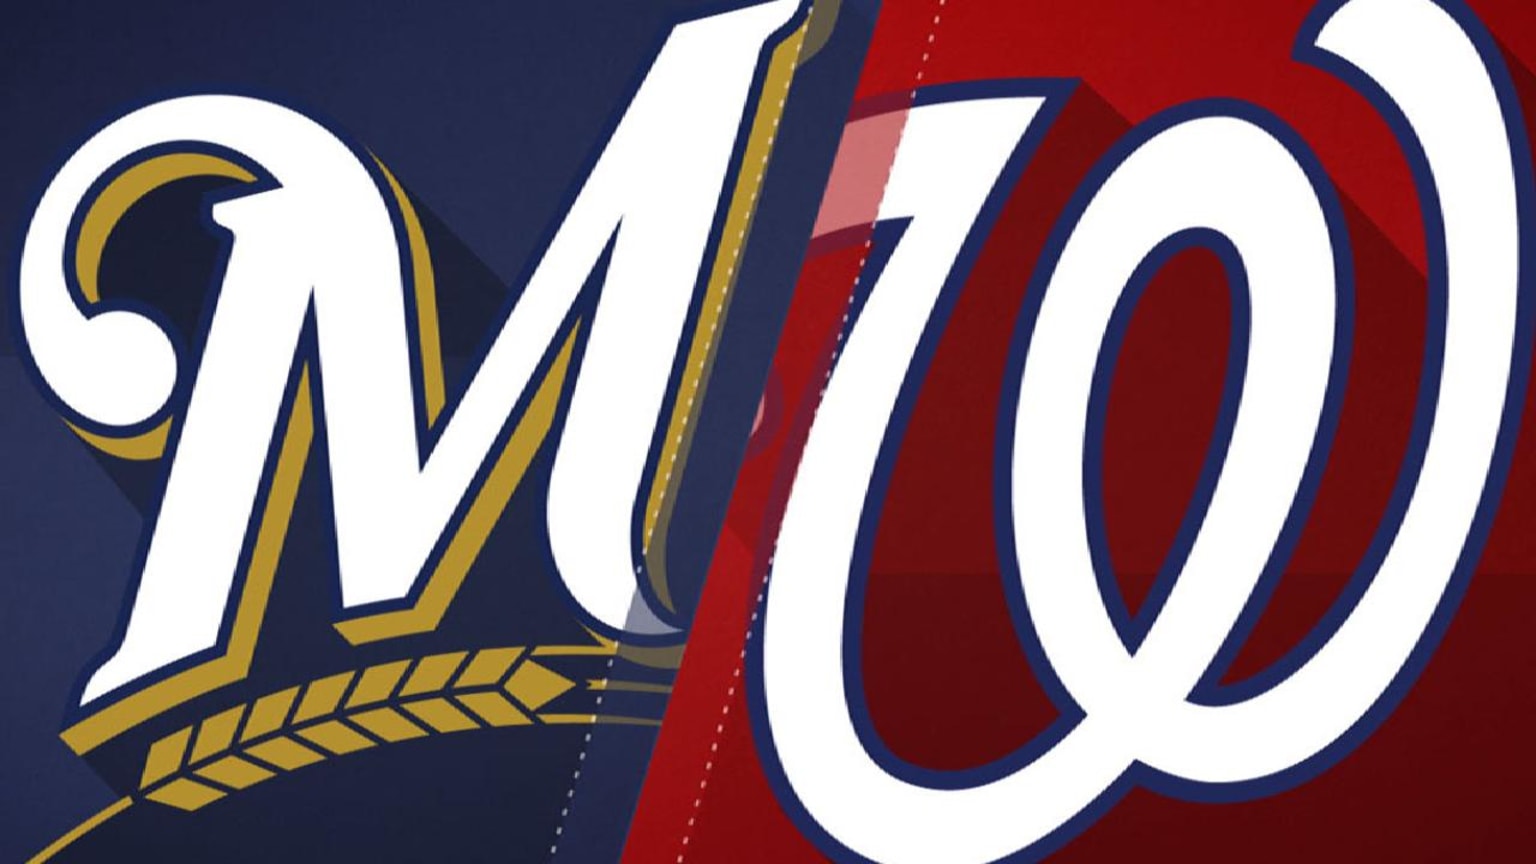 Rough second inning sinks Brewers, Crew loses 9-4 - Brew Crew Ball